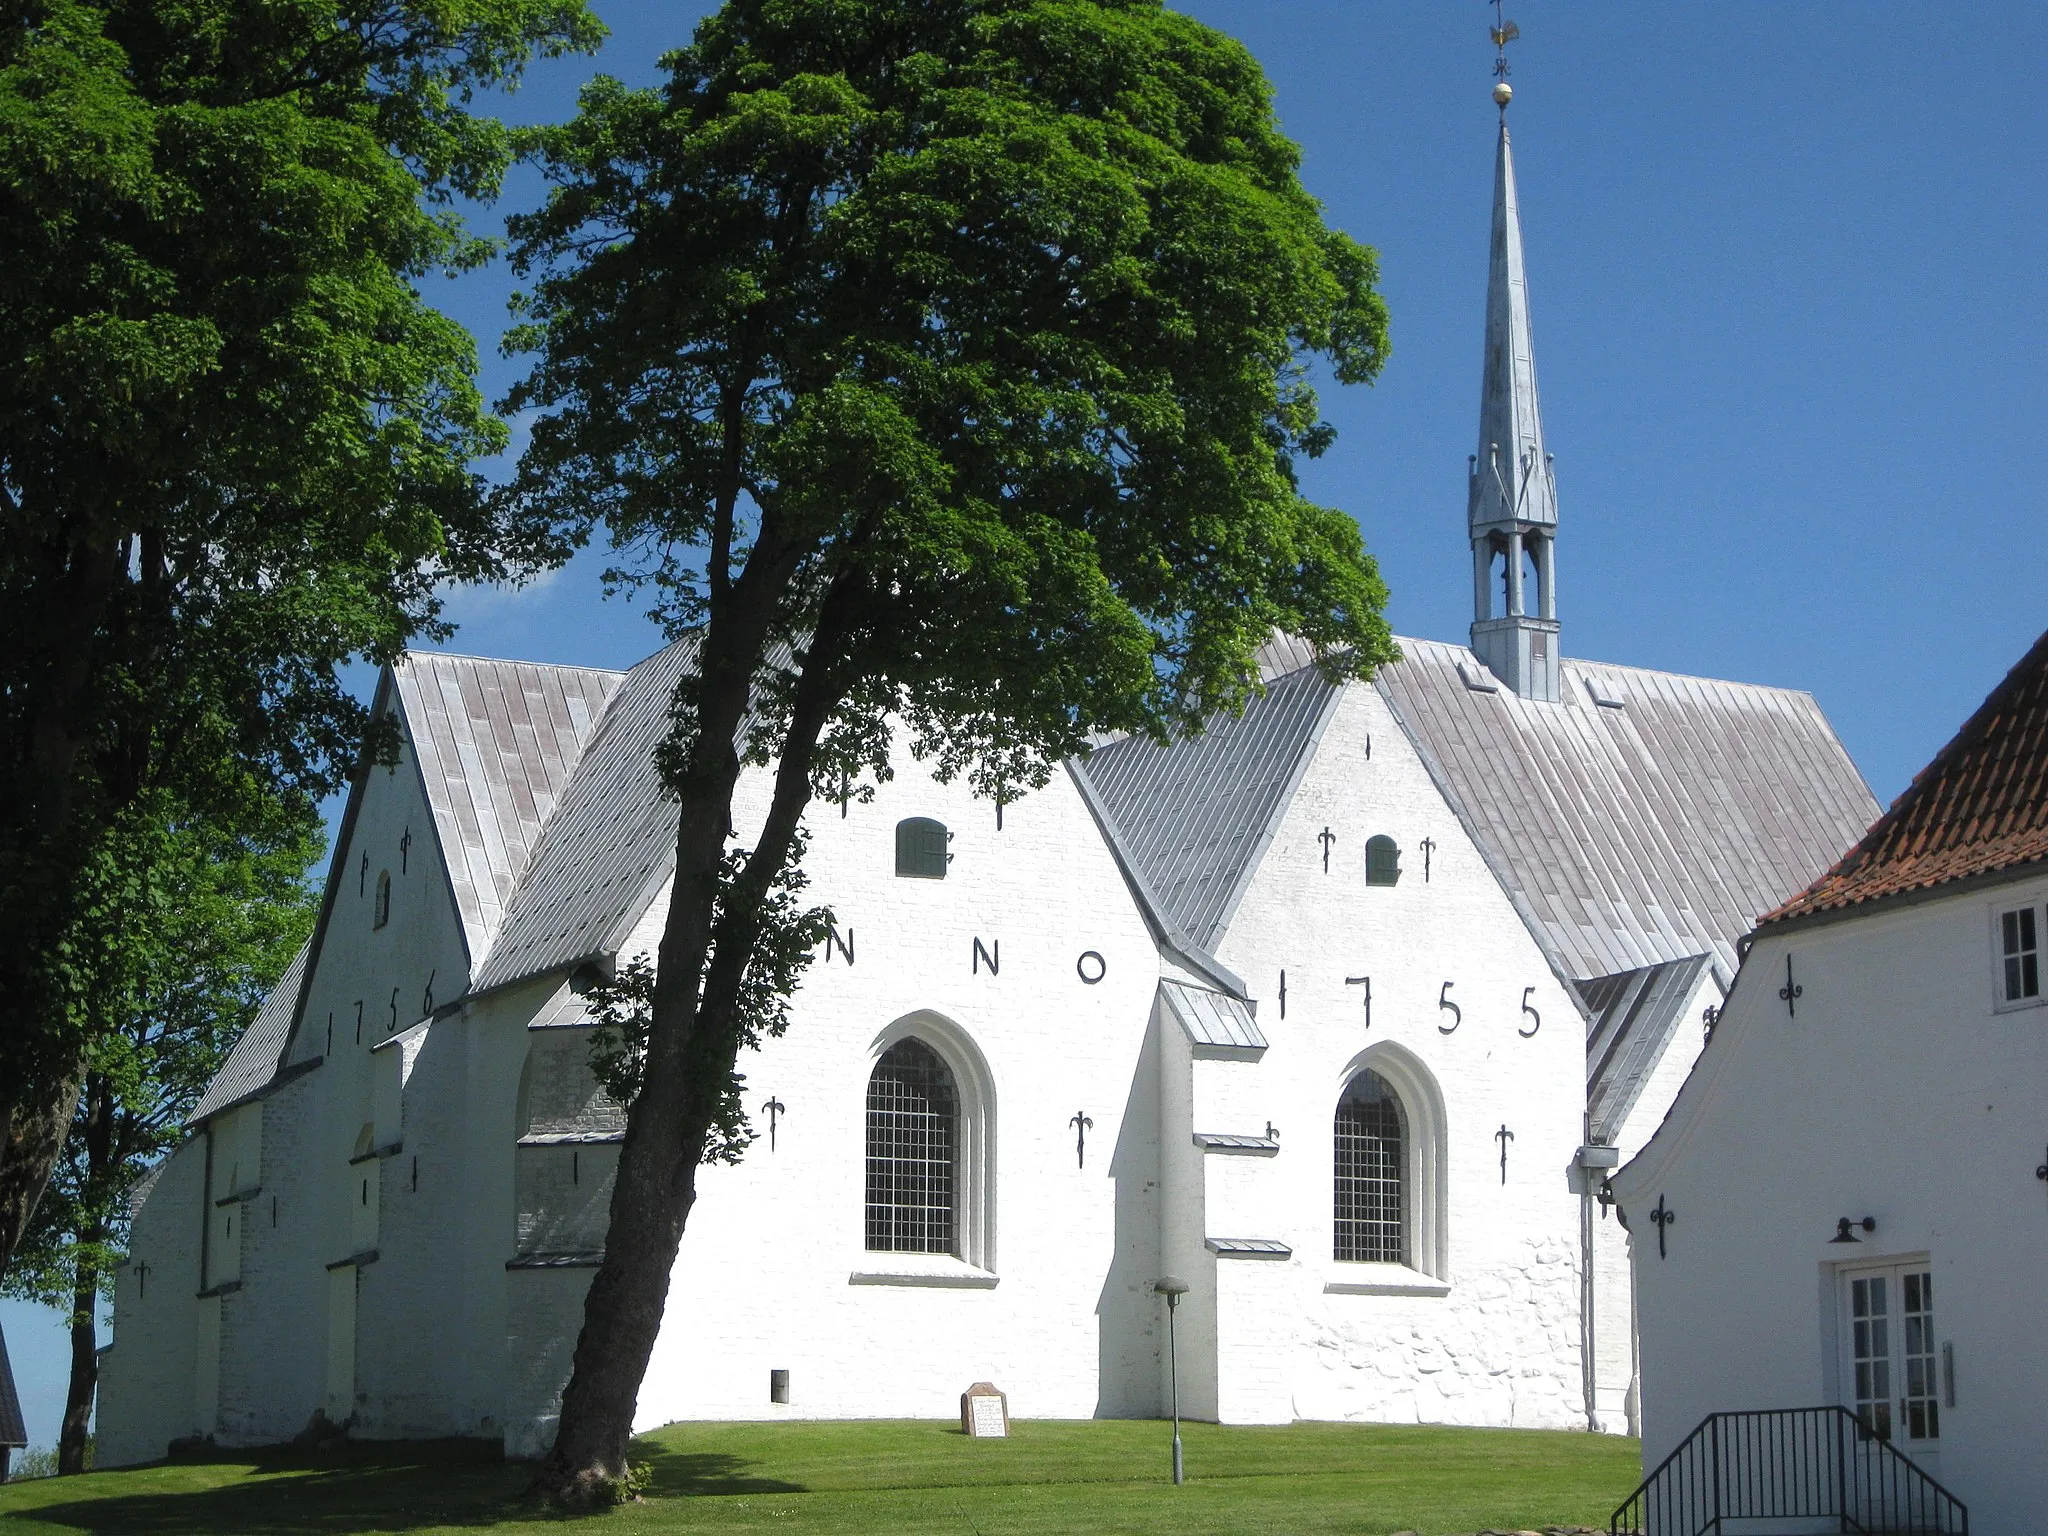 Photo showing: The church "Kliplev Kirke" in the small town "Kliplev". The town is located in Southern Jutland, Denmark.